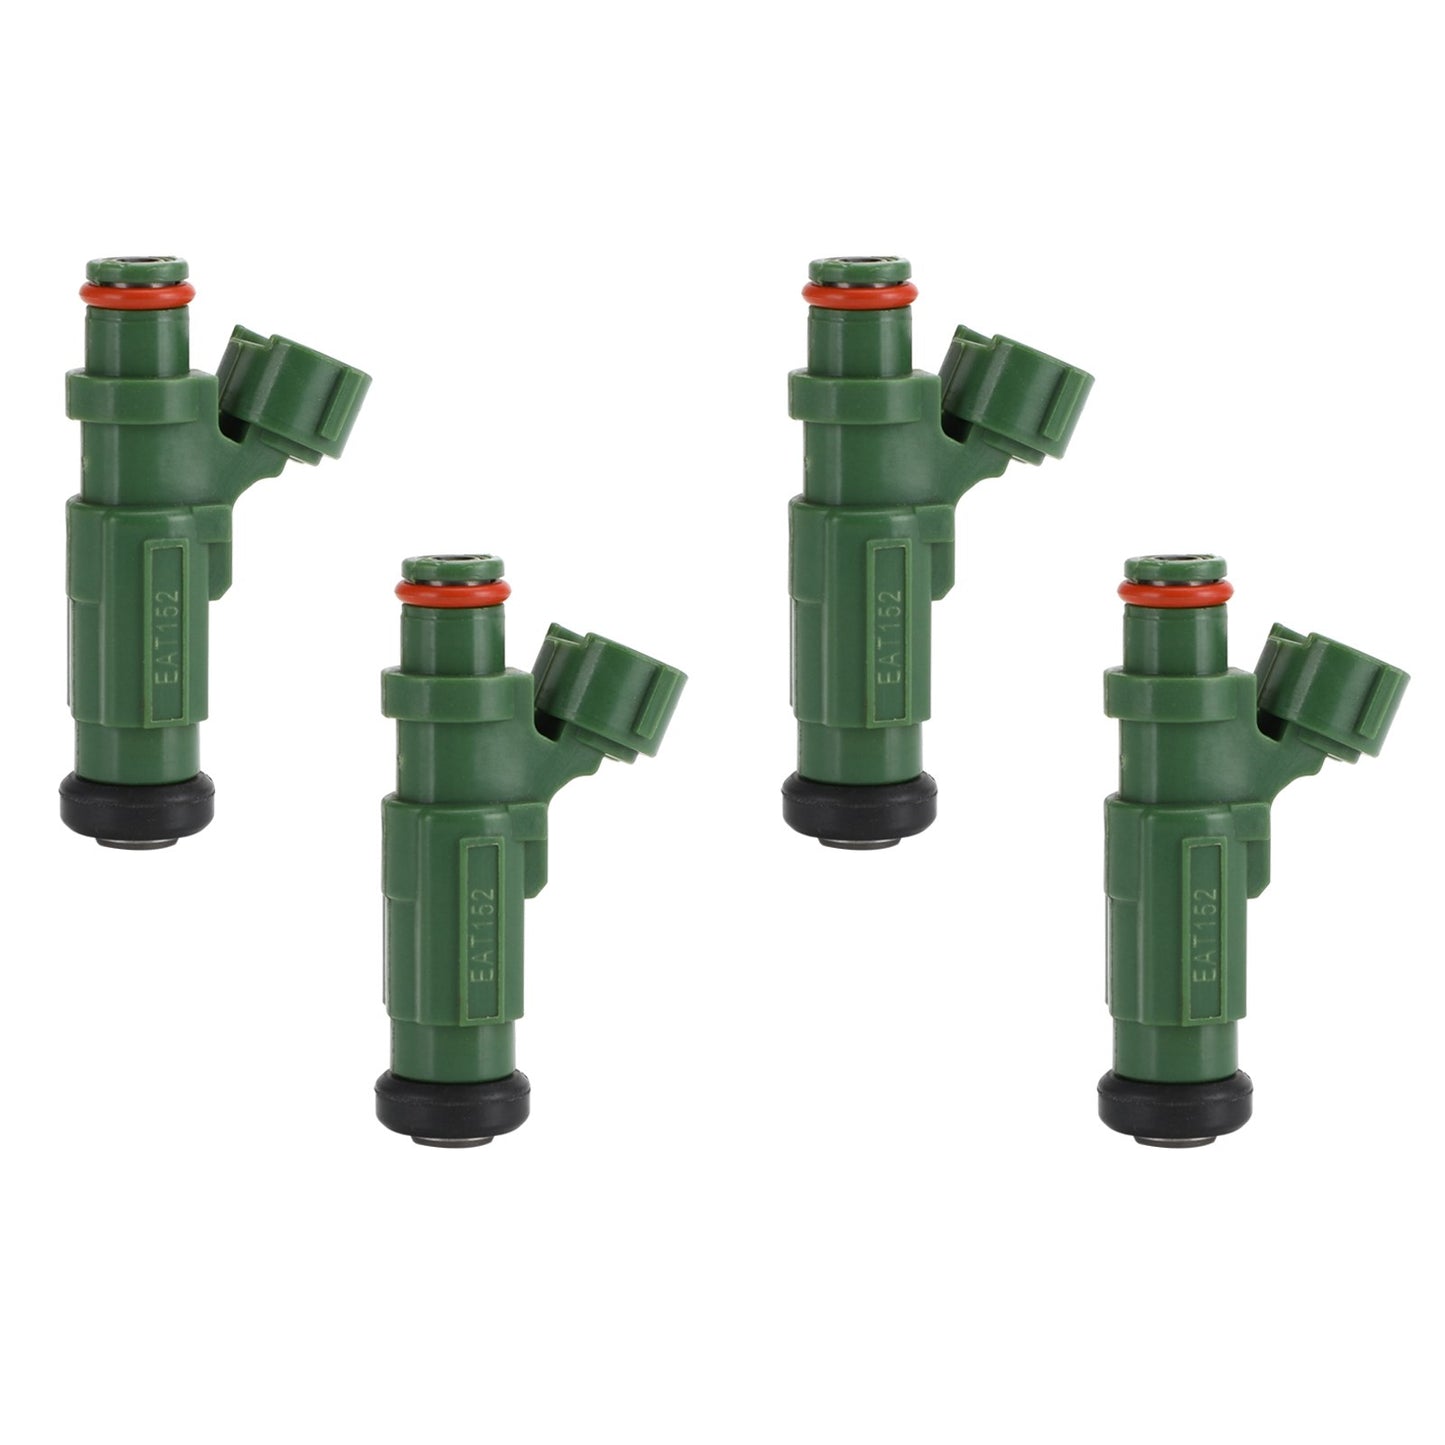 4pcs Fuel Injector 63P-13761-00-00 Für Yamaha F150 Outboard 2004-2013